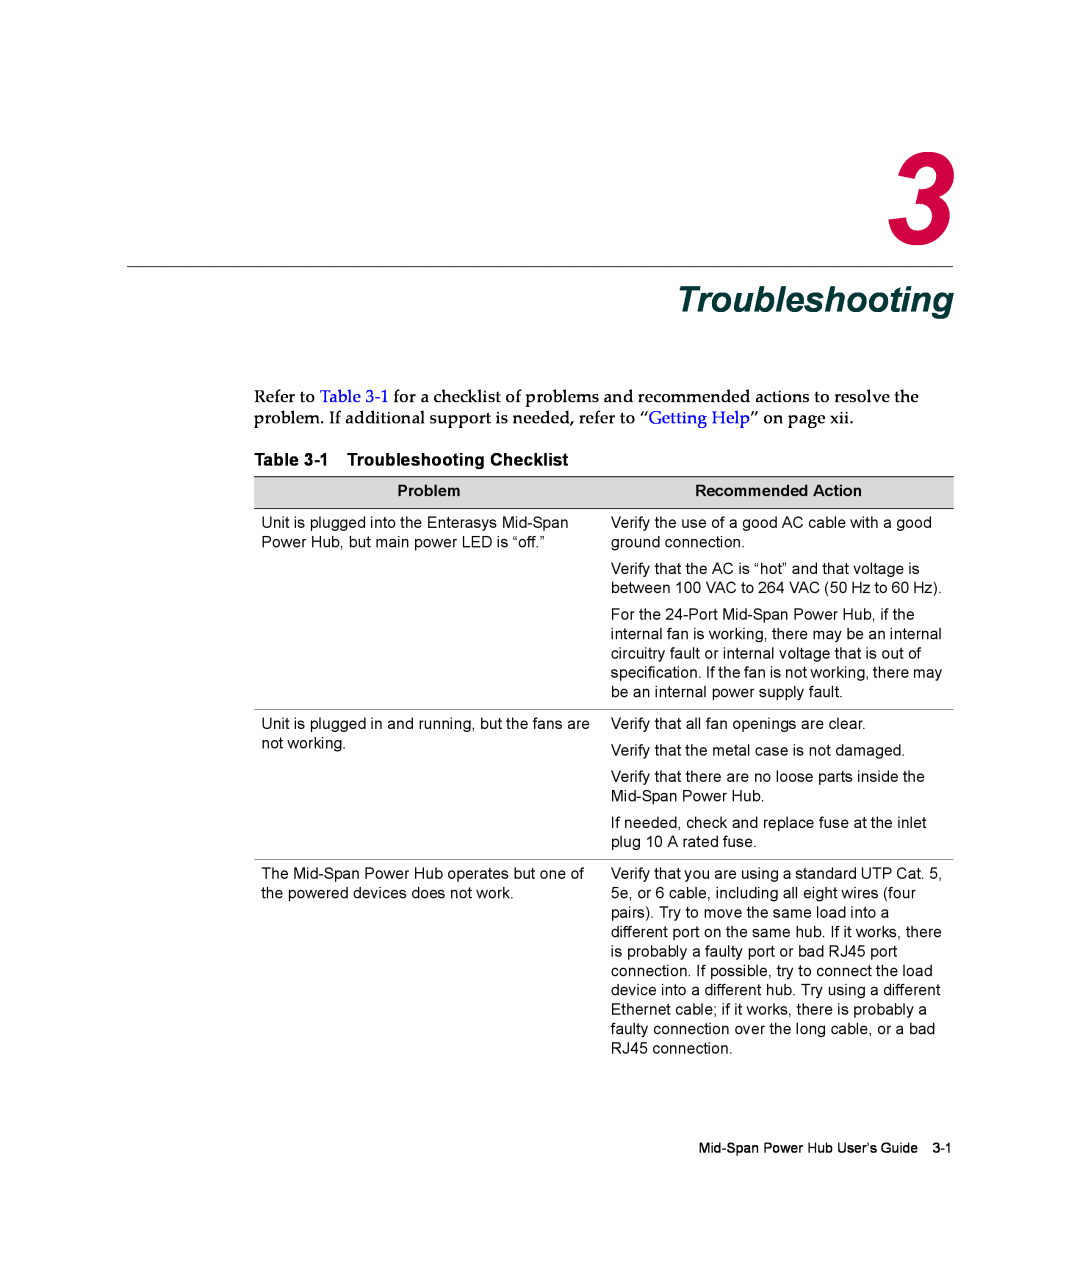 Enterasys Networks BL-6000ENT manual 1 Troubleshooting Checklist, Problem, Recommended Action 